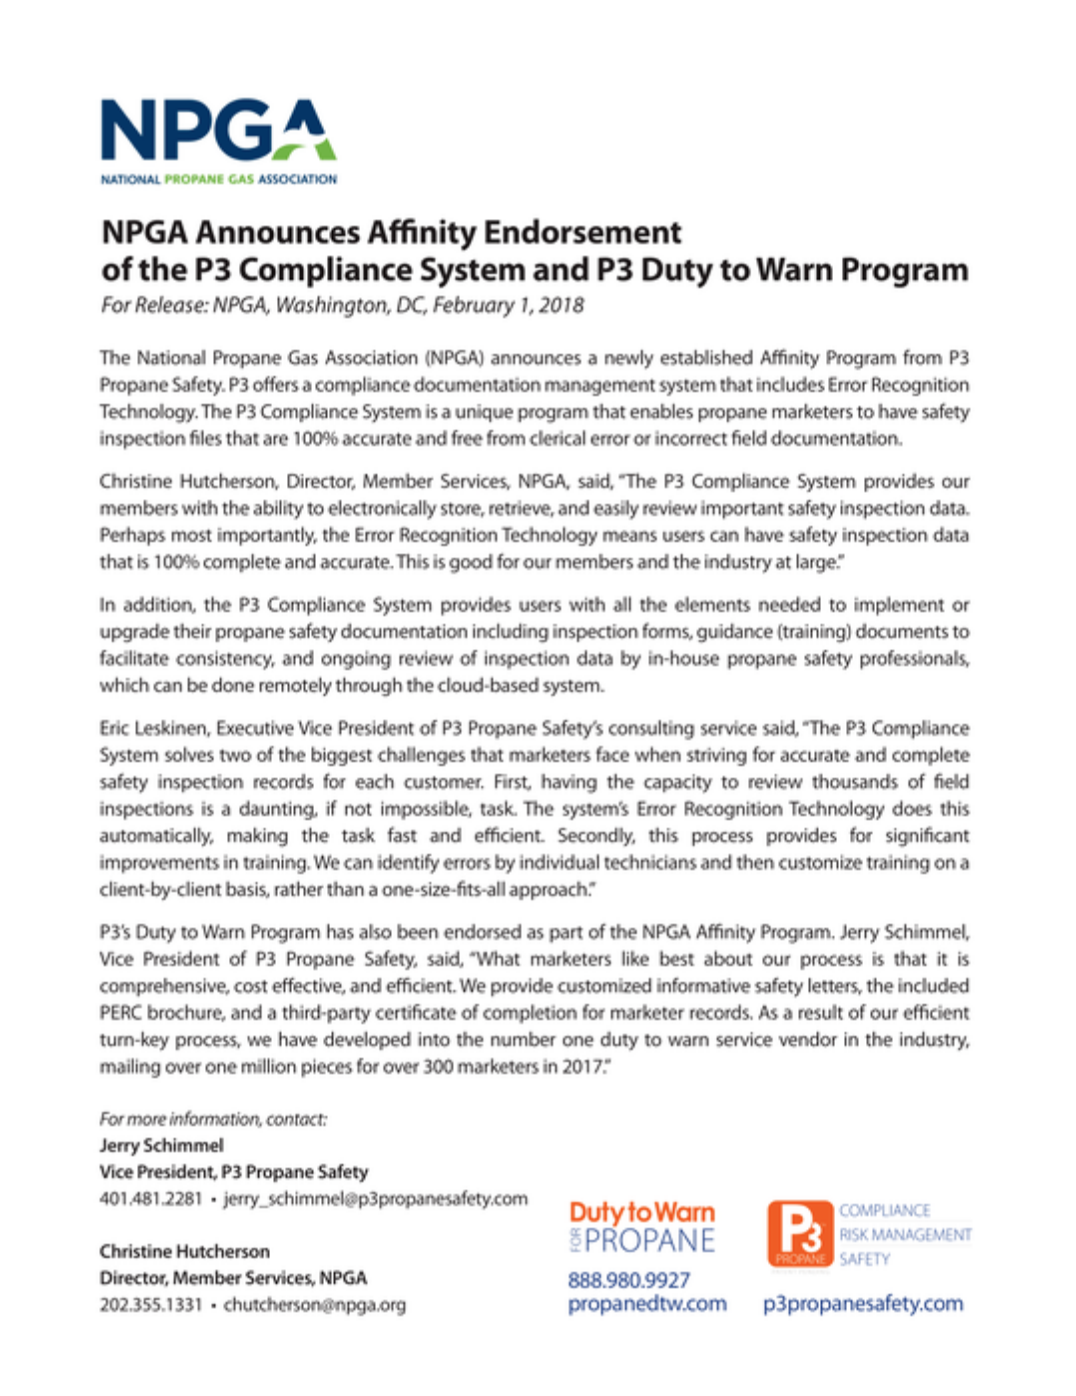 NPGA Announces AÂ¬ffinity Endorsement of the P3 Compliance System and P3 Duty to Warn Program